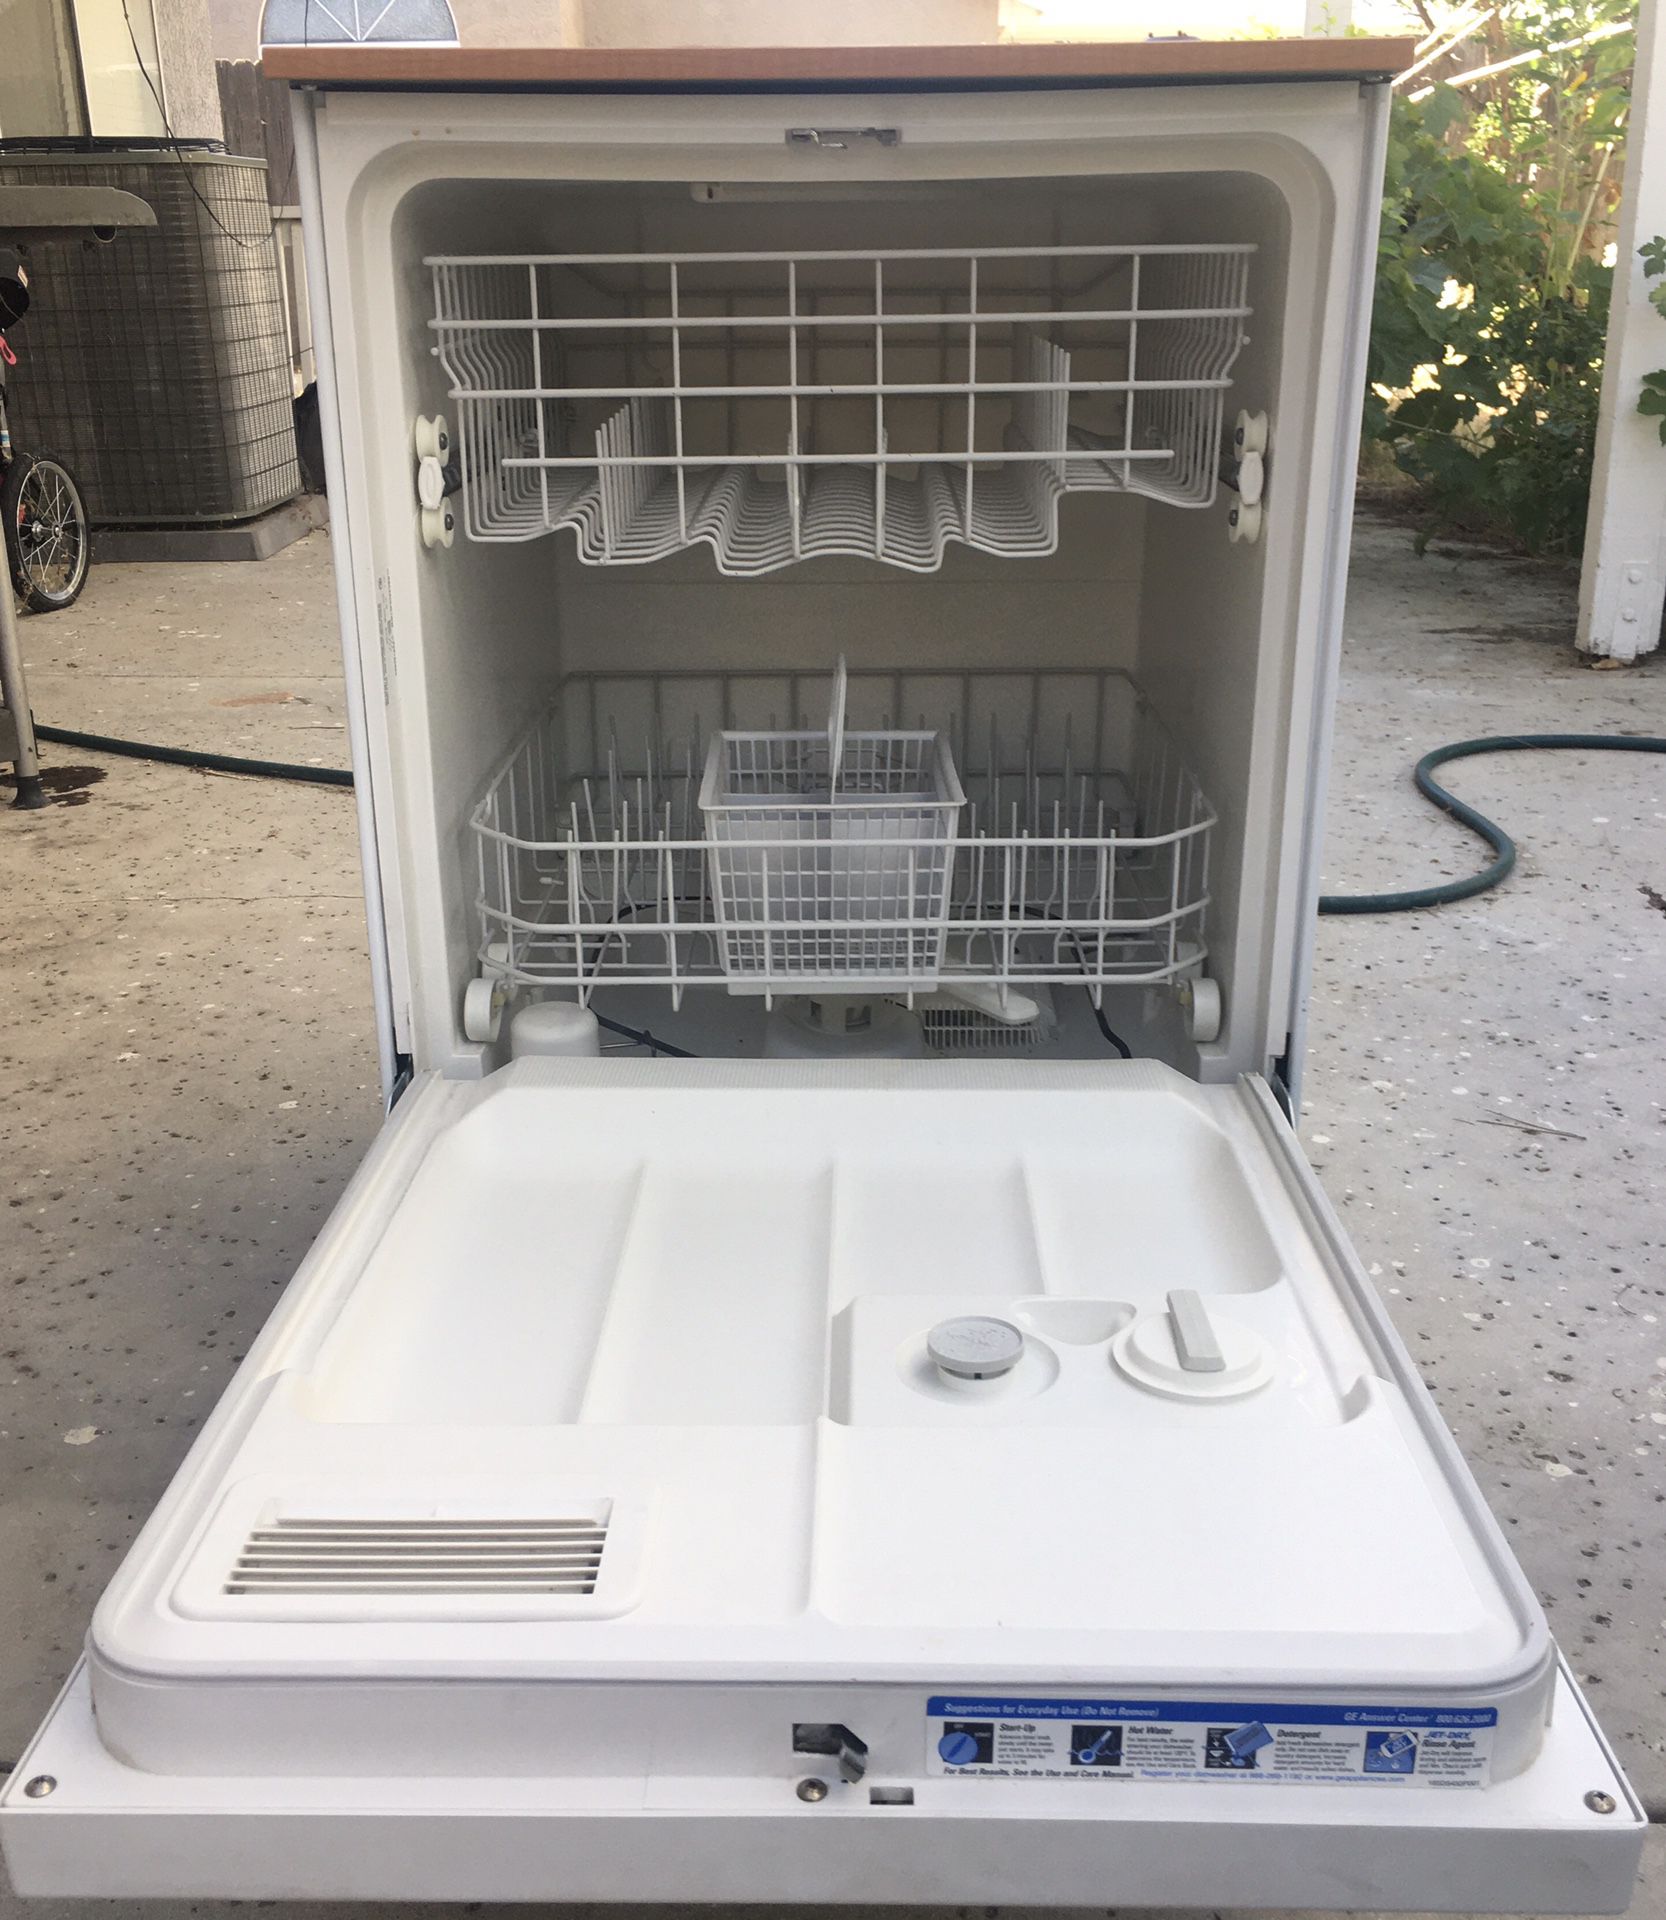 Portable Countertop Dishwasher Novete for Sale in Long Beach, CA - OfferUp